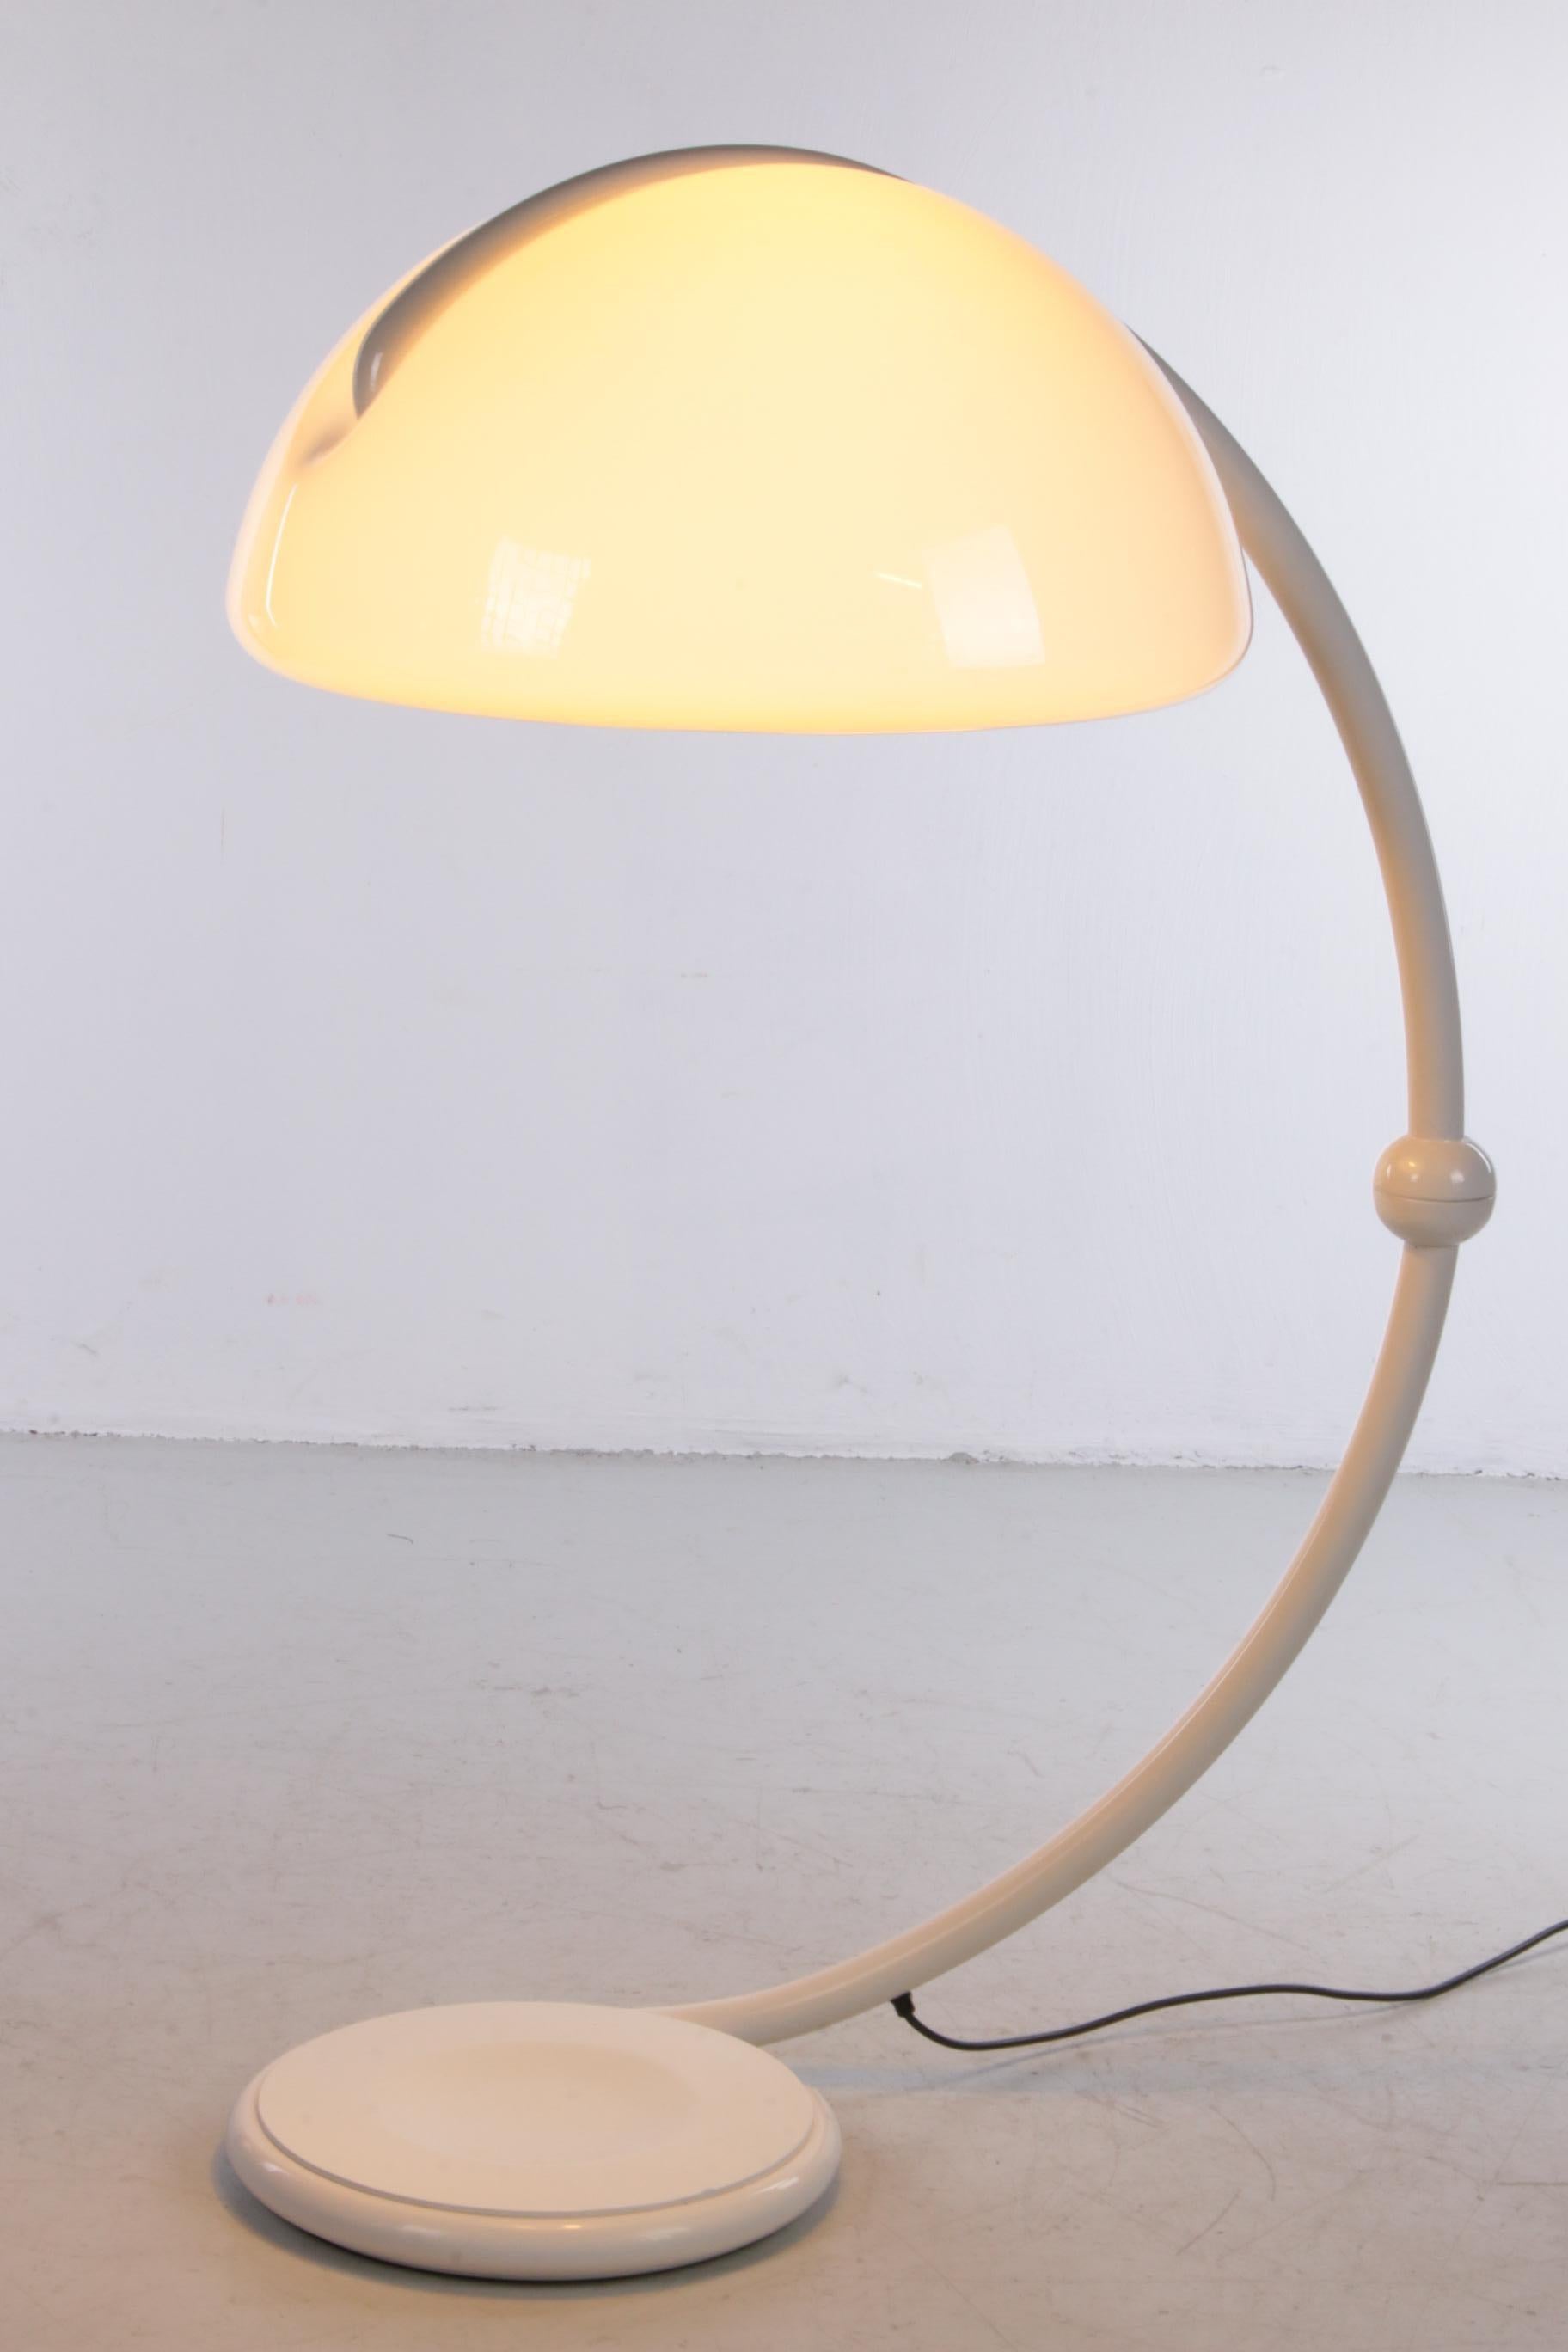 A beautiful iconic floor lamp by the famous Italian designer Elio Martinelli for the company Martinelli Luce. This is the white version of the model 2131, better known as the Serpente model.

The design of this floor lamp dates back to 1965.